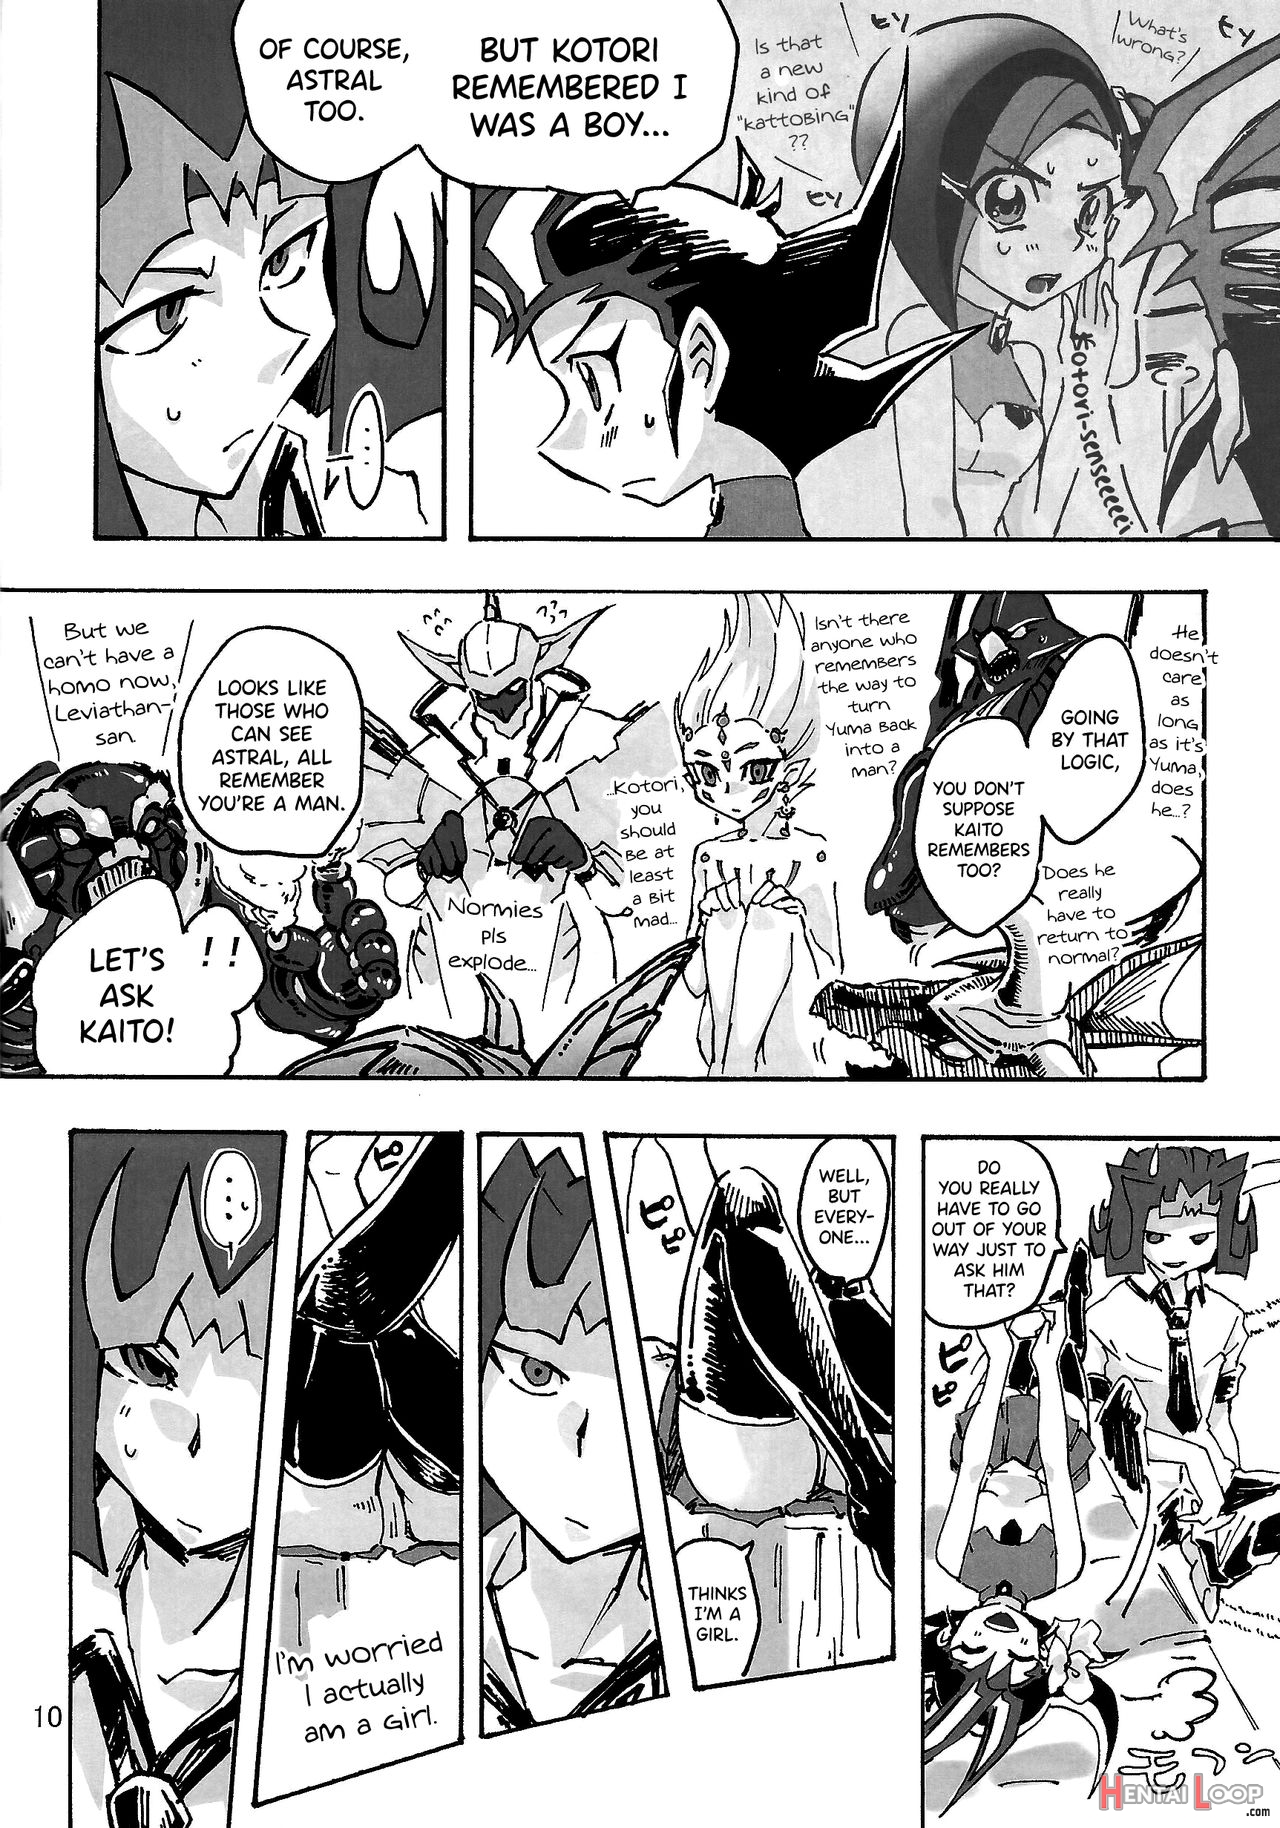 Boy Meets Girl page 9